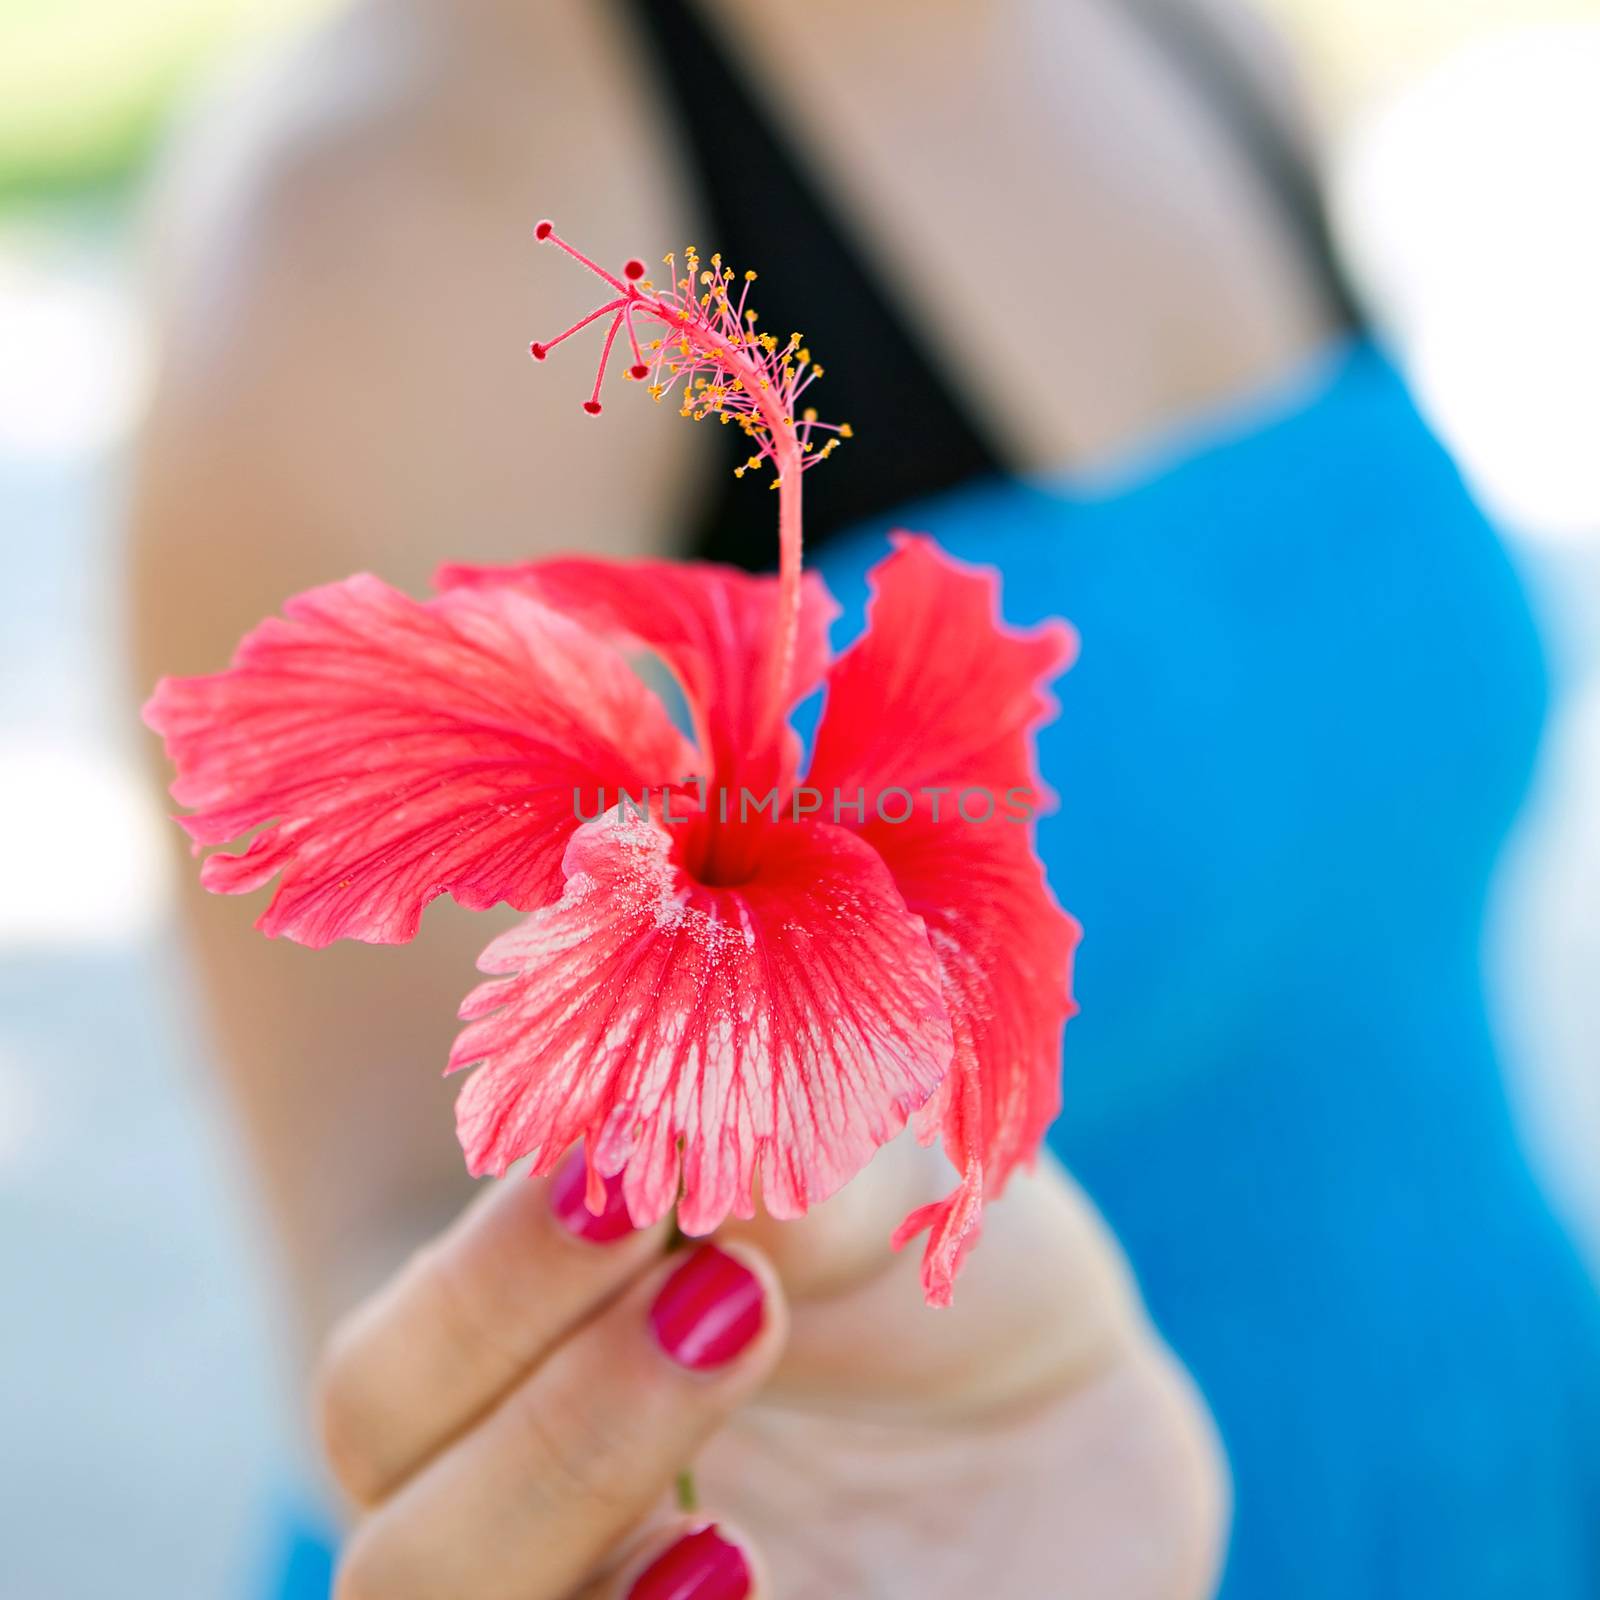 Red Hibiscus Flower Closeup by graficallyminded